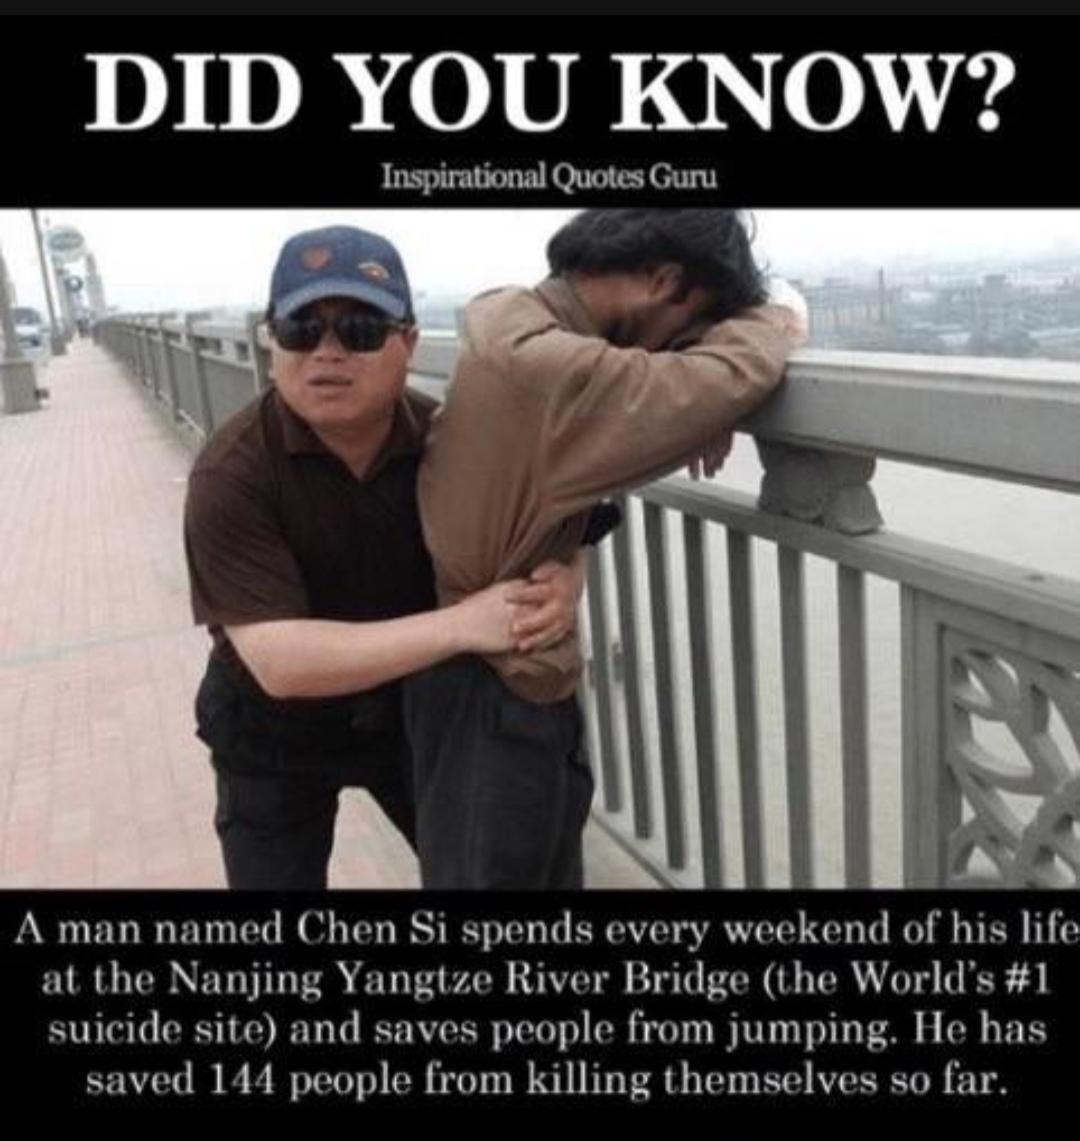 inspirational quotes for suicidal person - Did You Know? Inspirational Quotes Guru A man named Chen Si spends every weekend of his life at the Nanjing Yangtze River Bridge the World's suicide site and saves people from jumping. He has saved 144 people fro